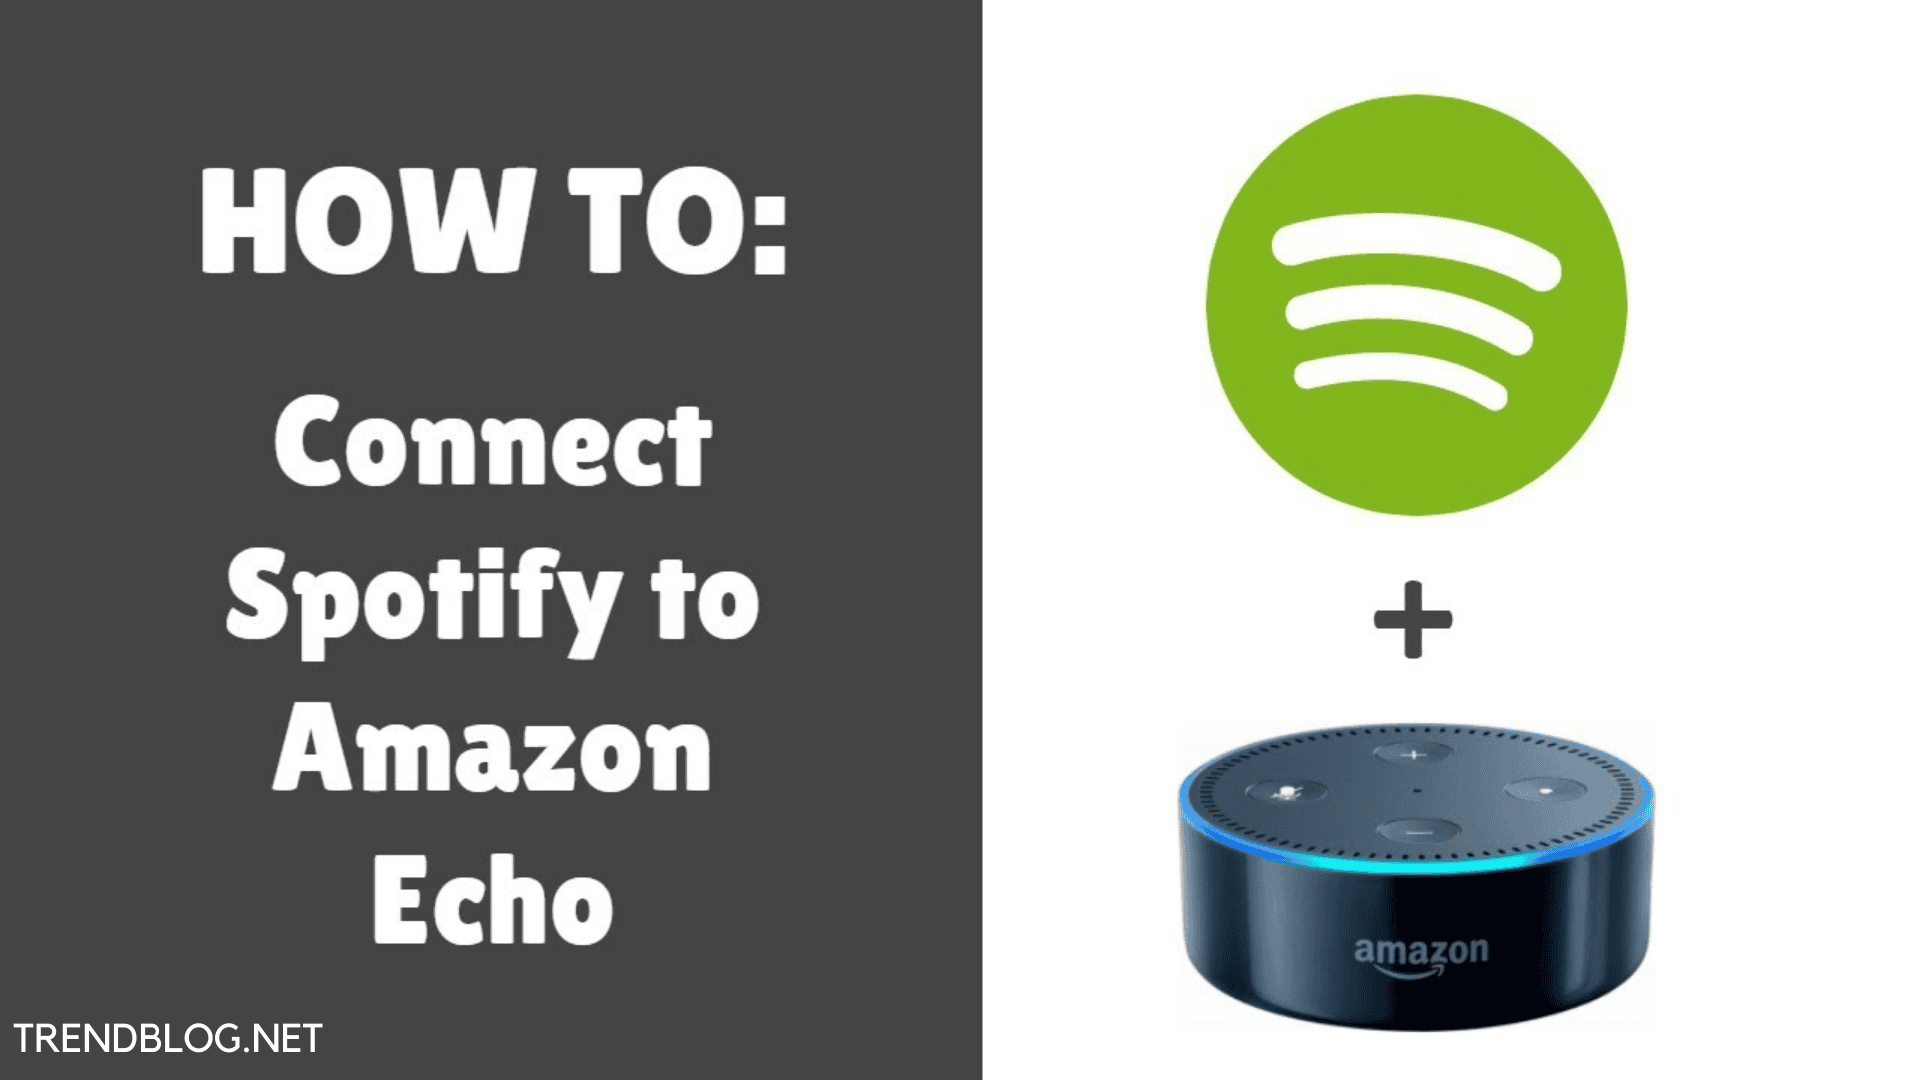  How to Connect Spotify on your Amazon Alexa